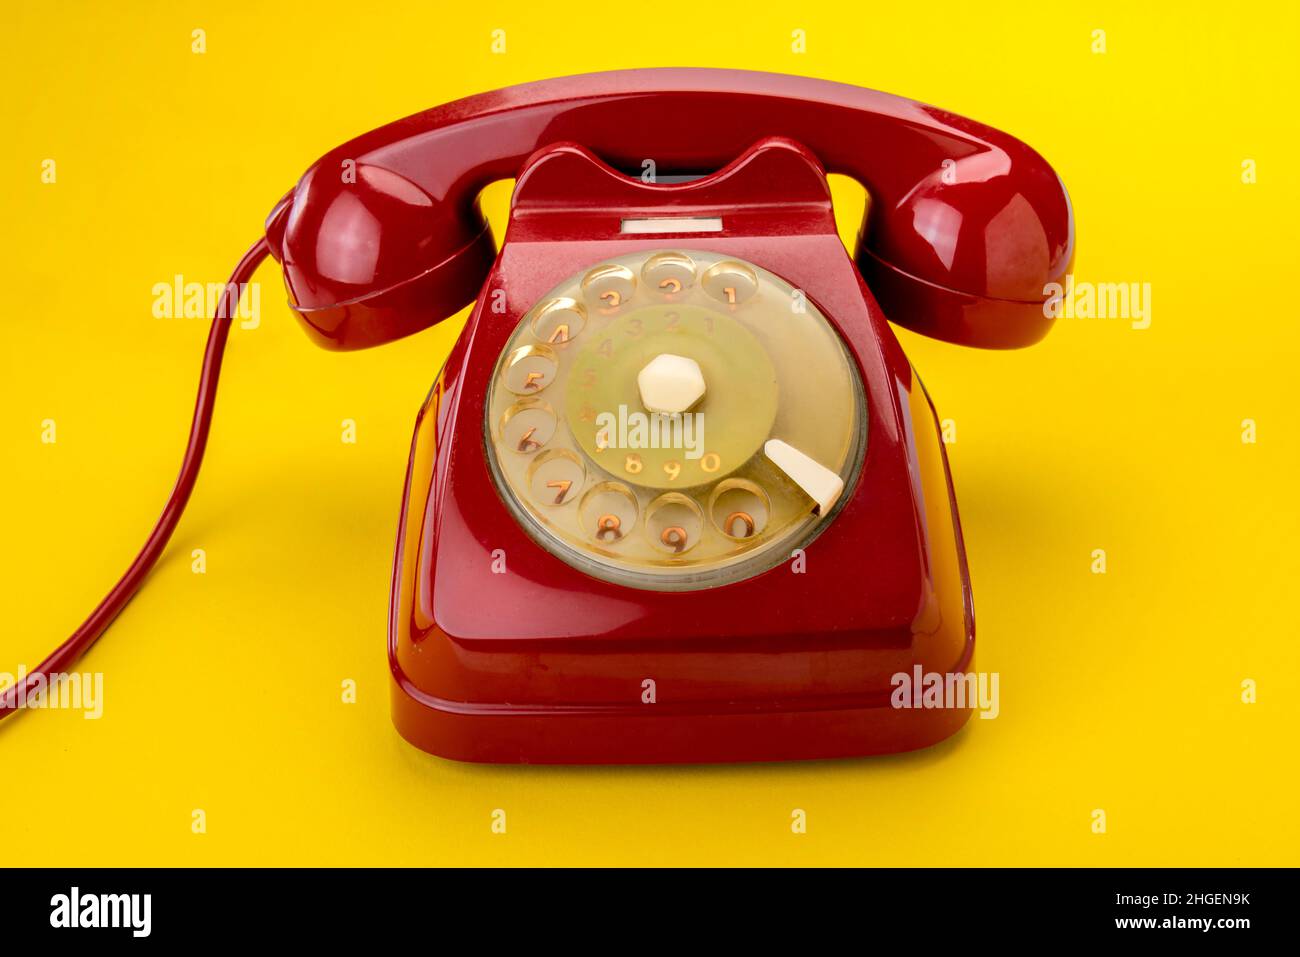 Old red rotating dial telephon isolated on yellow background Stock Photo